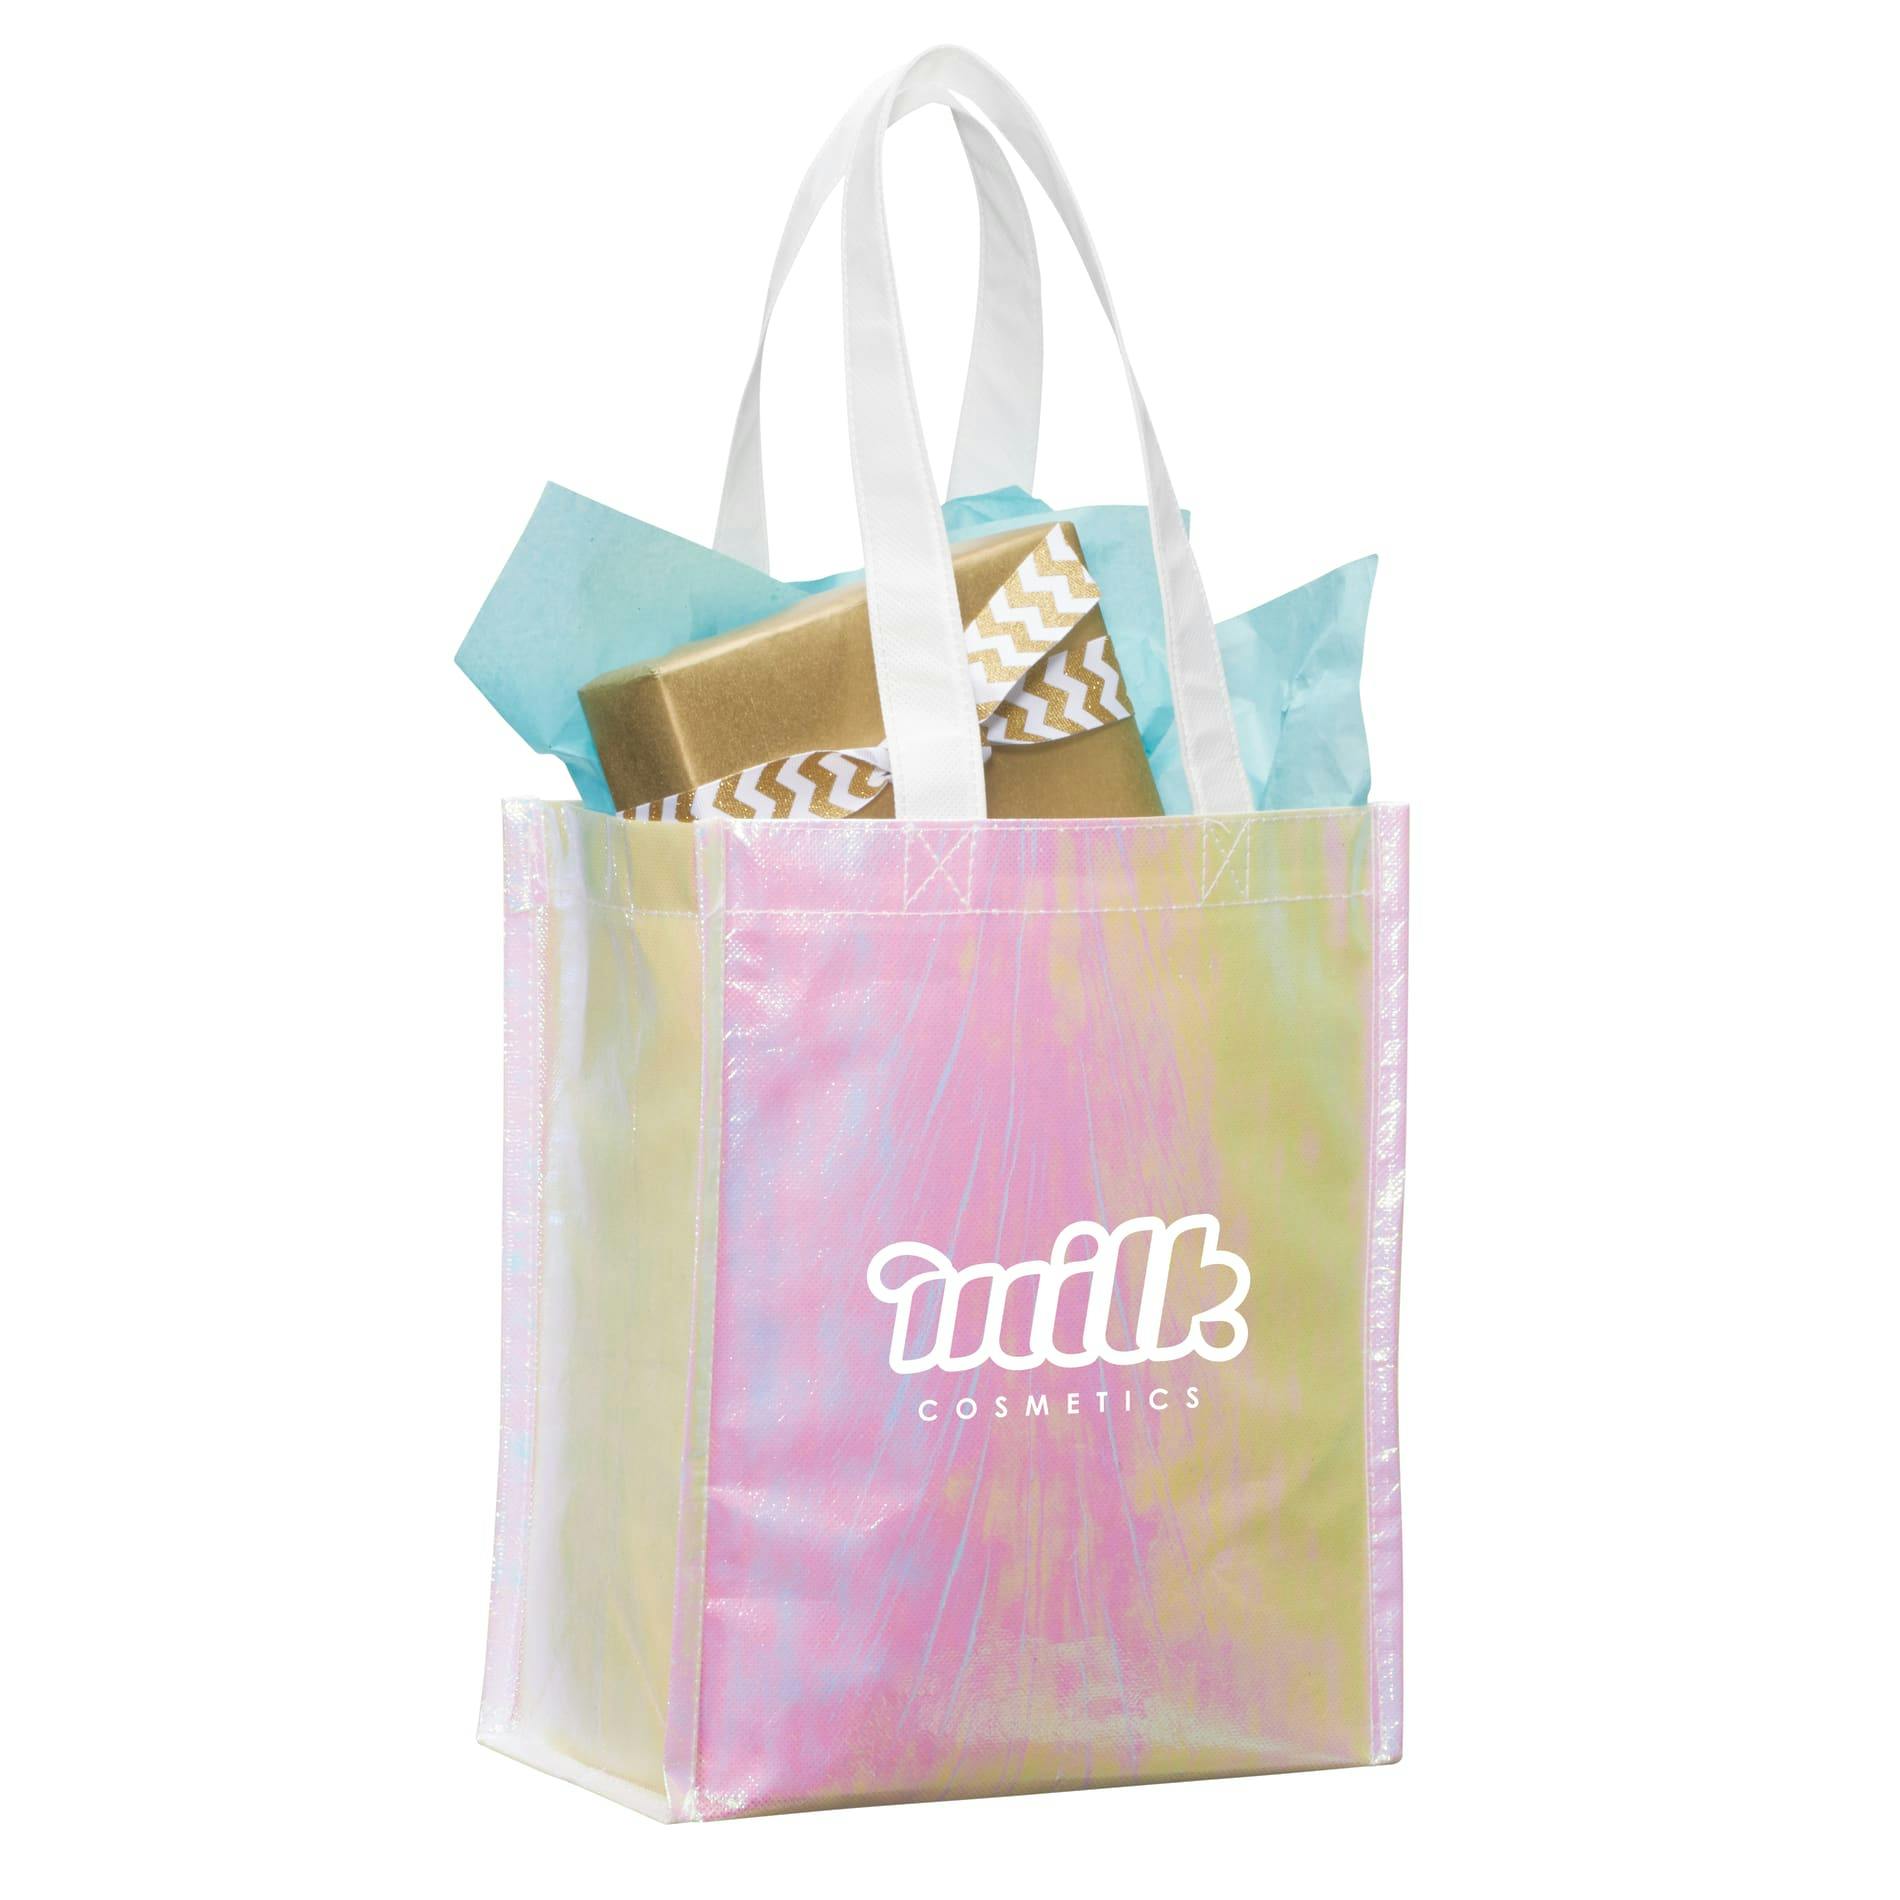 Iridescent Non-Woven Gift Tote - additional Image 2